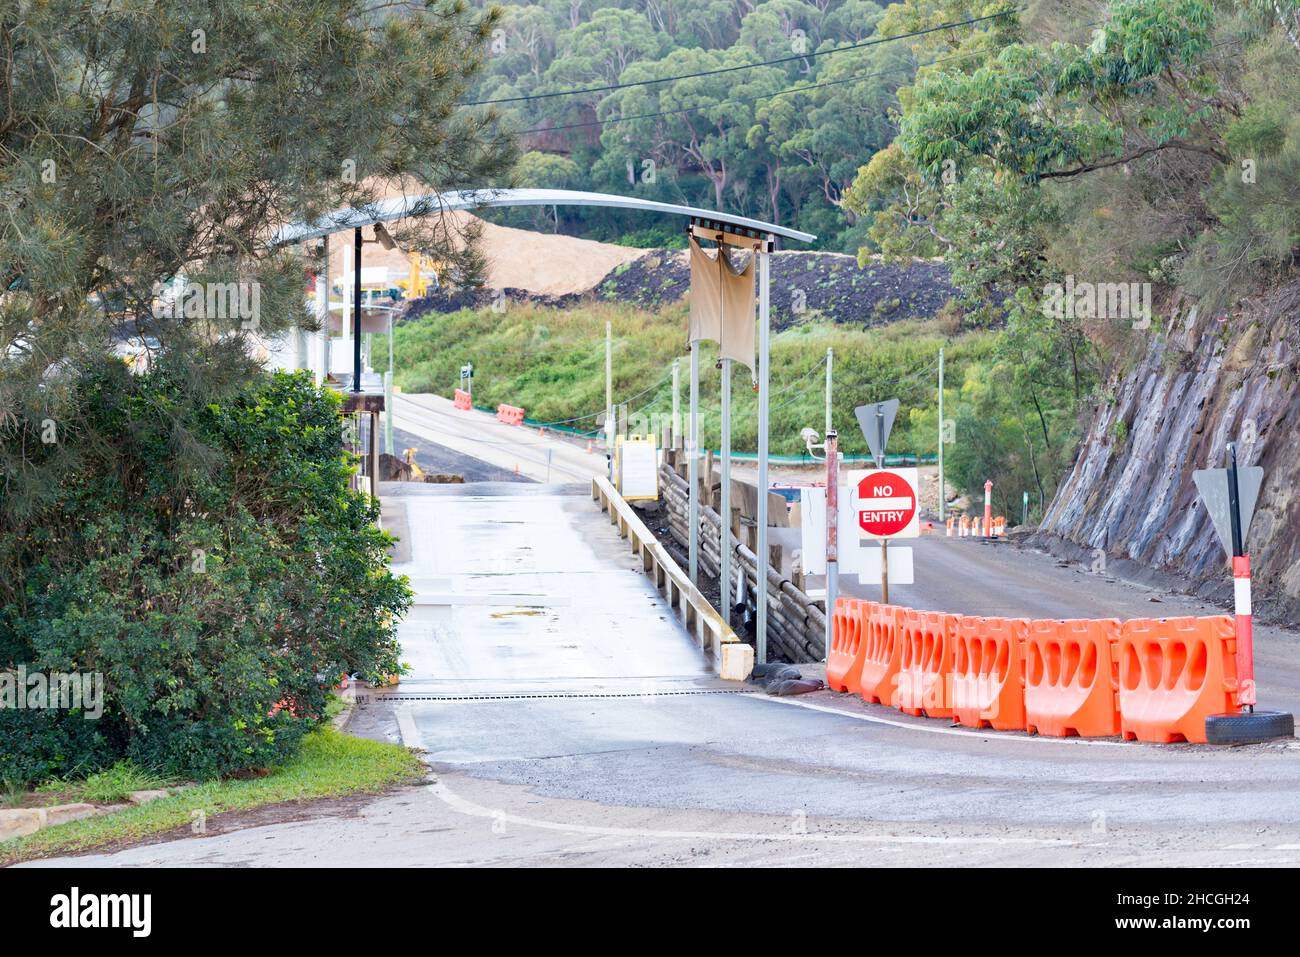 One of four permanent weighbridges at Kimbriki waste processing facility in northern Sydney, Australia that weigh vehicles in and out of the facility Stock Photo